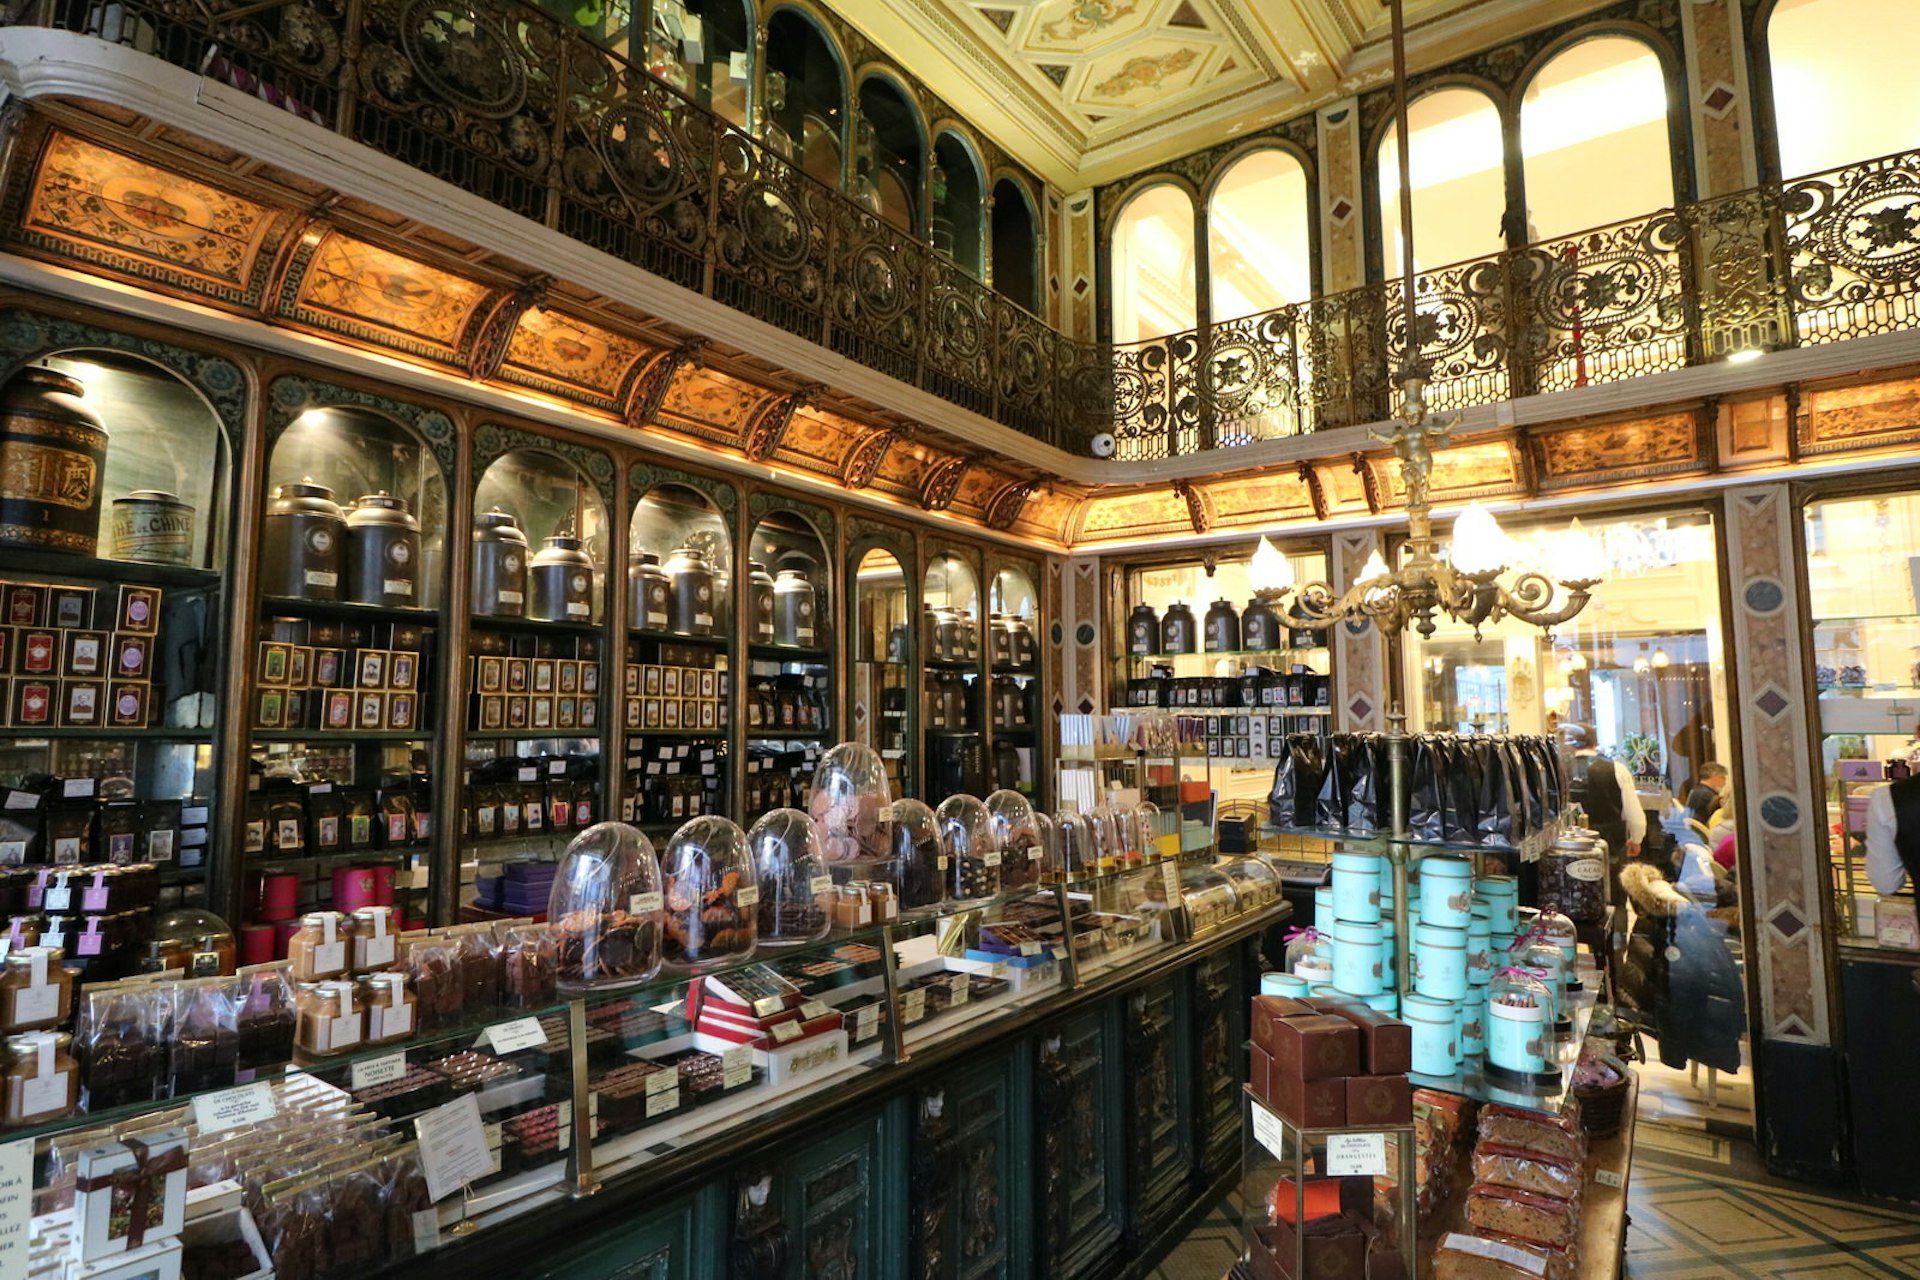 Counters and shelves are stacked with packets of chocolates in this former pharmacy building with original 19th-century features